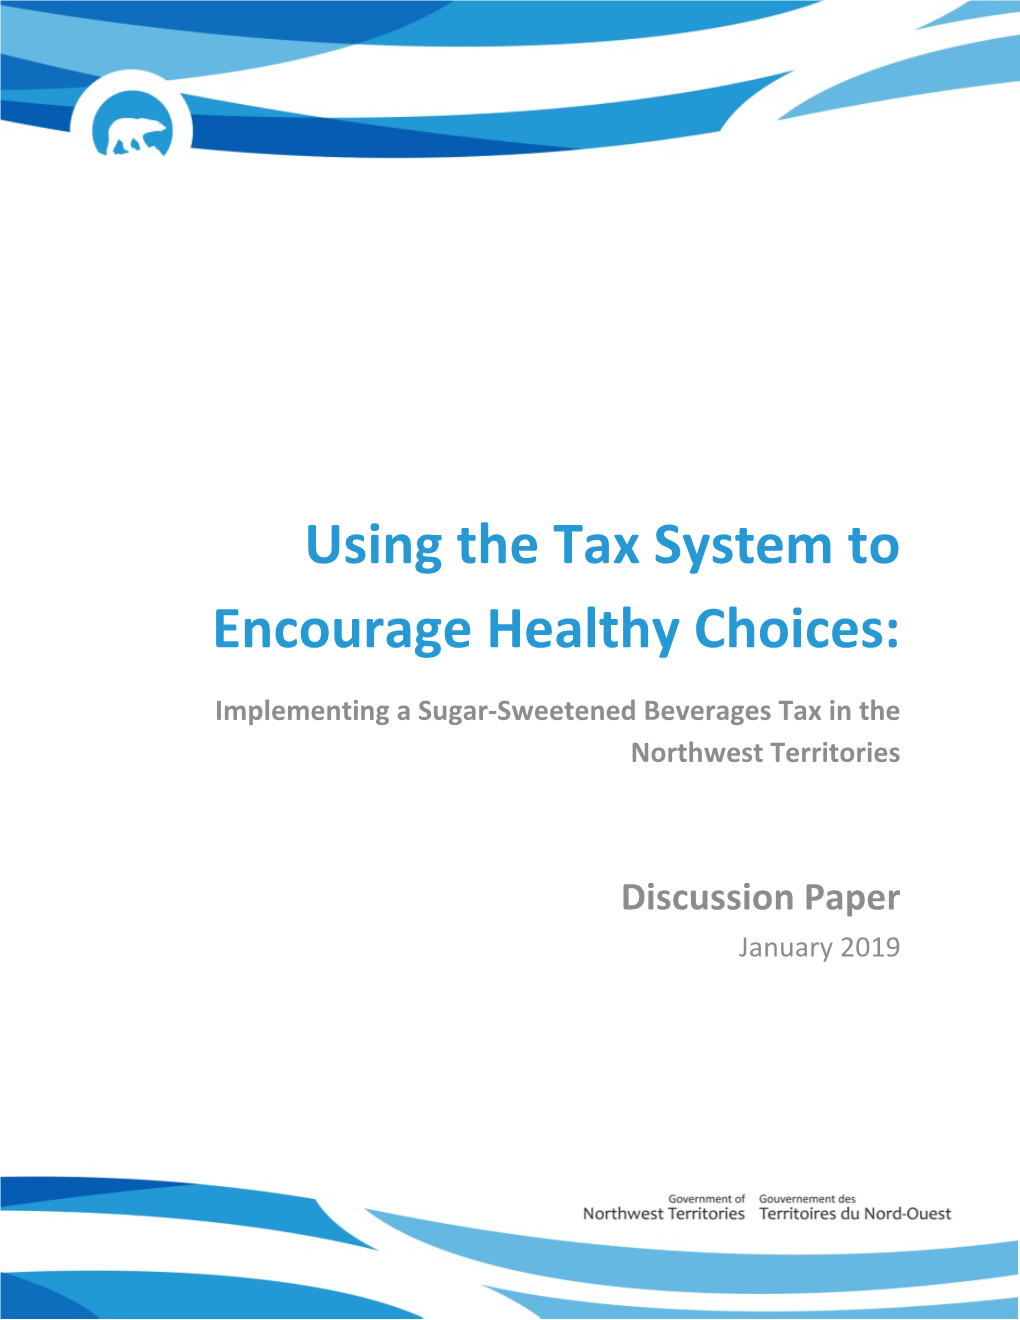 Implementing a Sugar-Sweetened Beverages Tax in the Northwest Territories